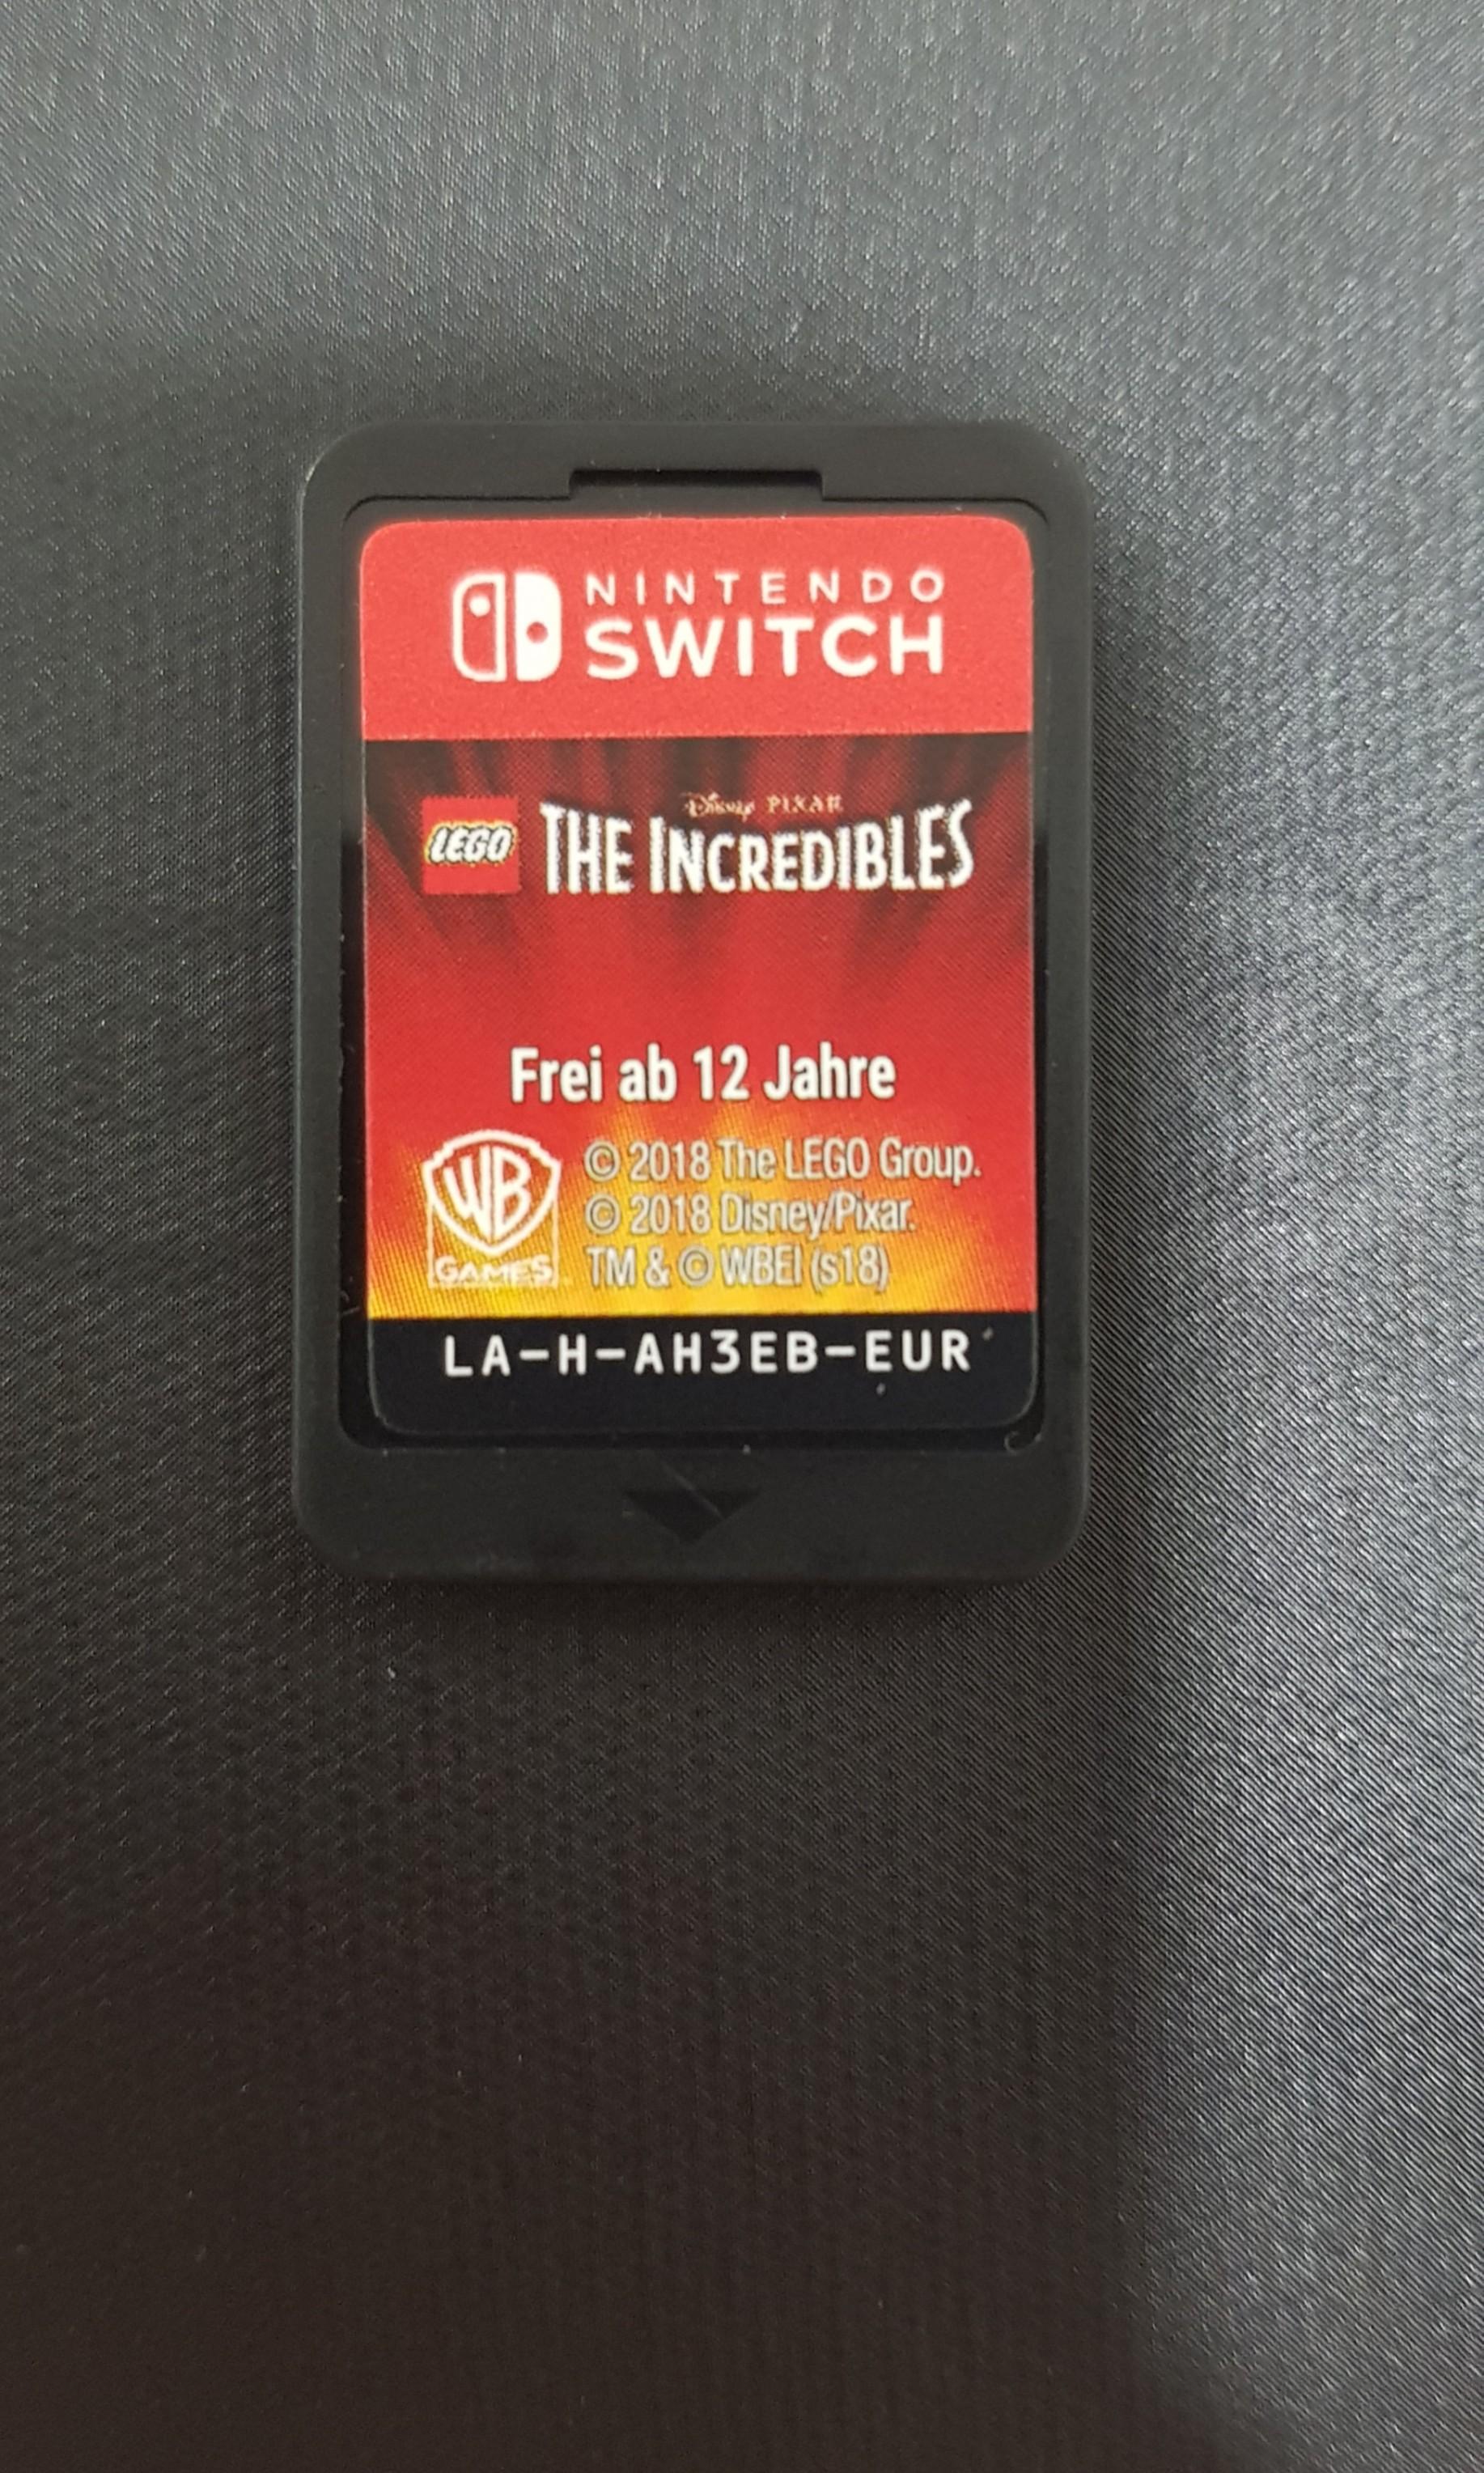 the incredibles nintendo switch game